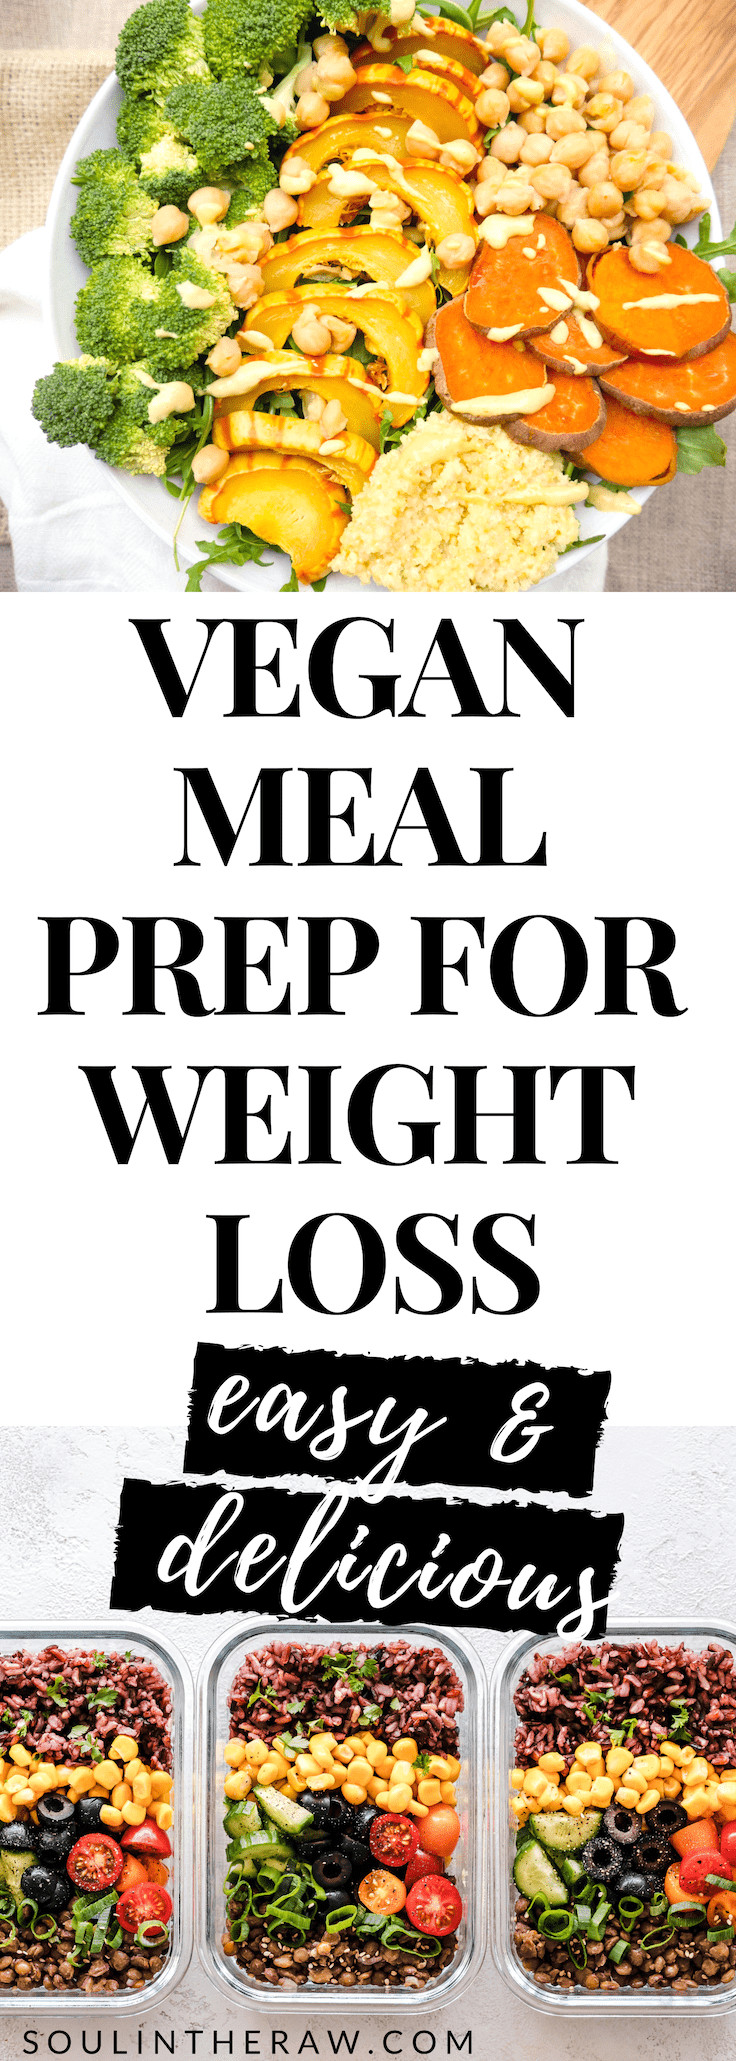 Plant Based Recipes For Weight Loss
 Plant Based Diet Weight Loss The Vegan Meal Prep Plan